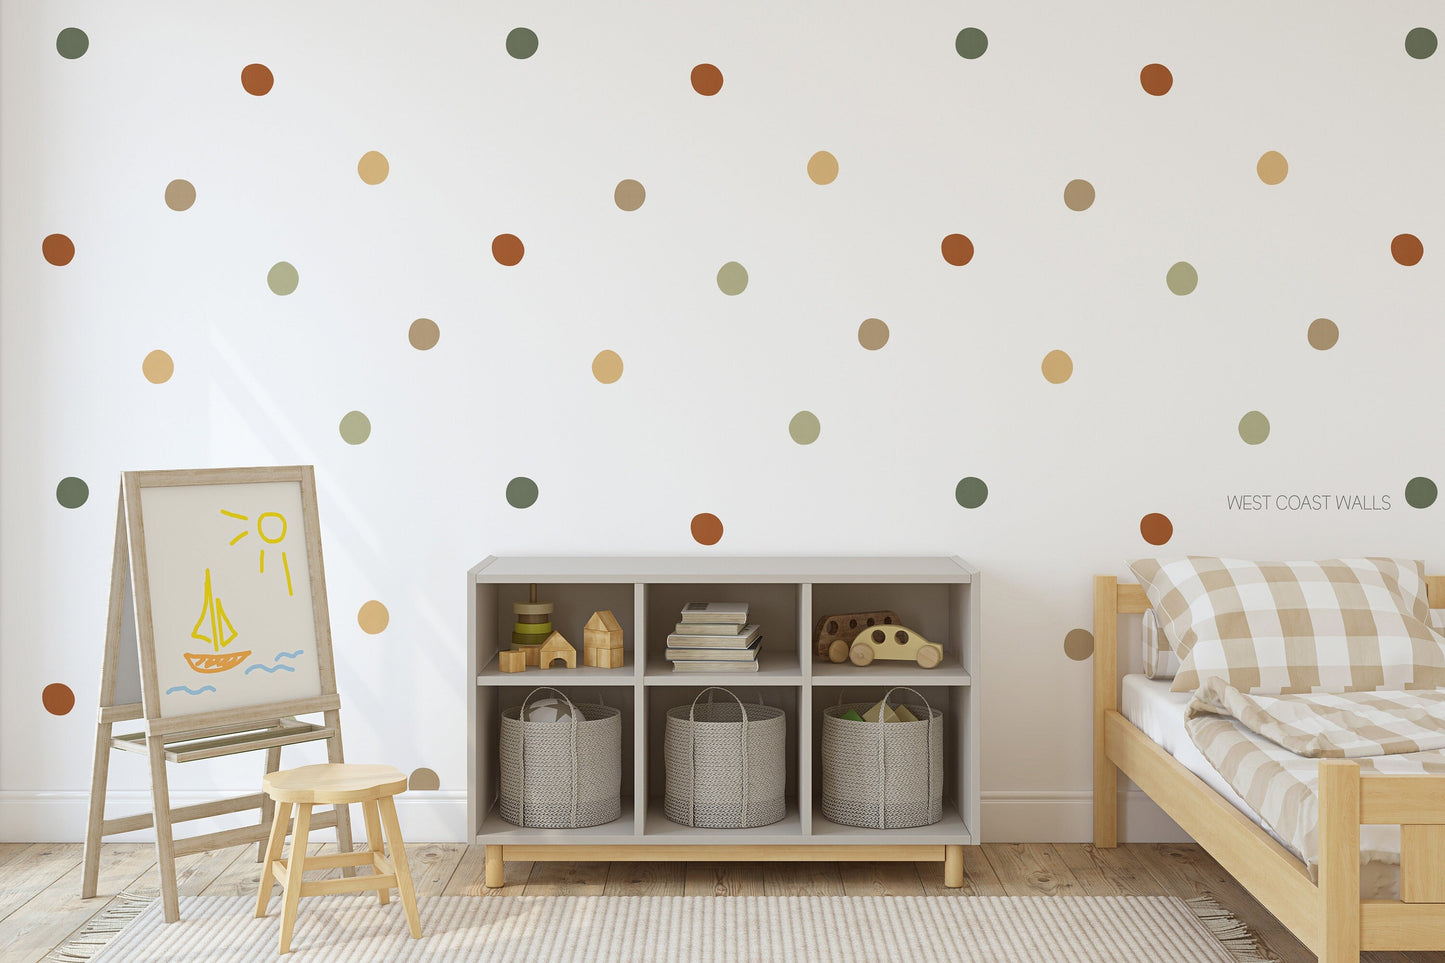 Green Neutral Painted Removable Dot Decals